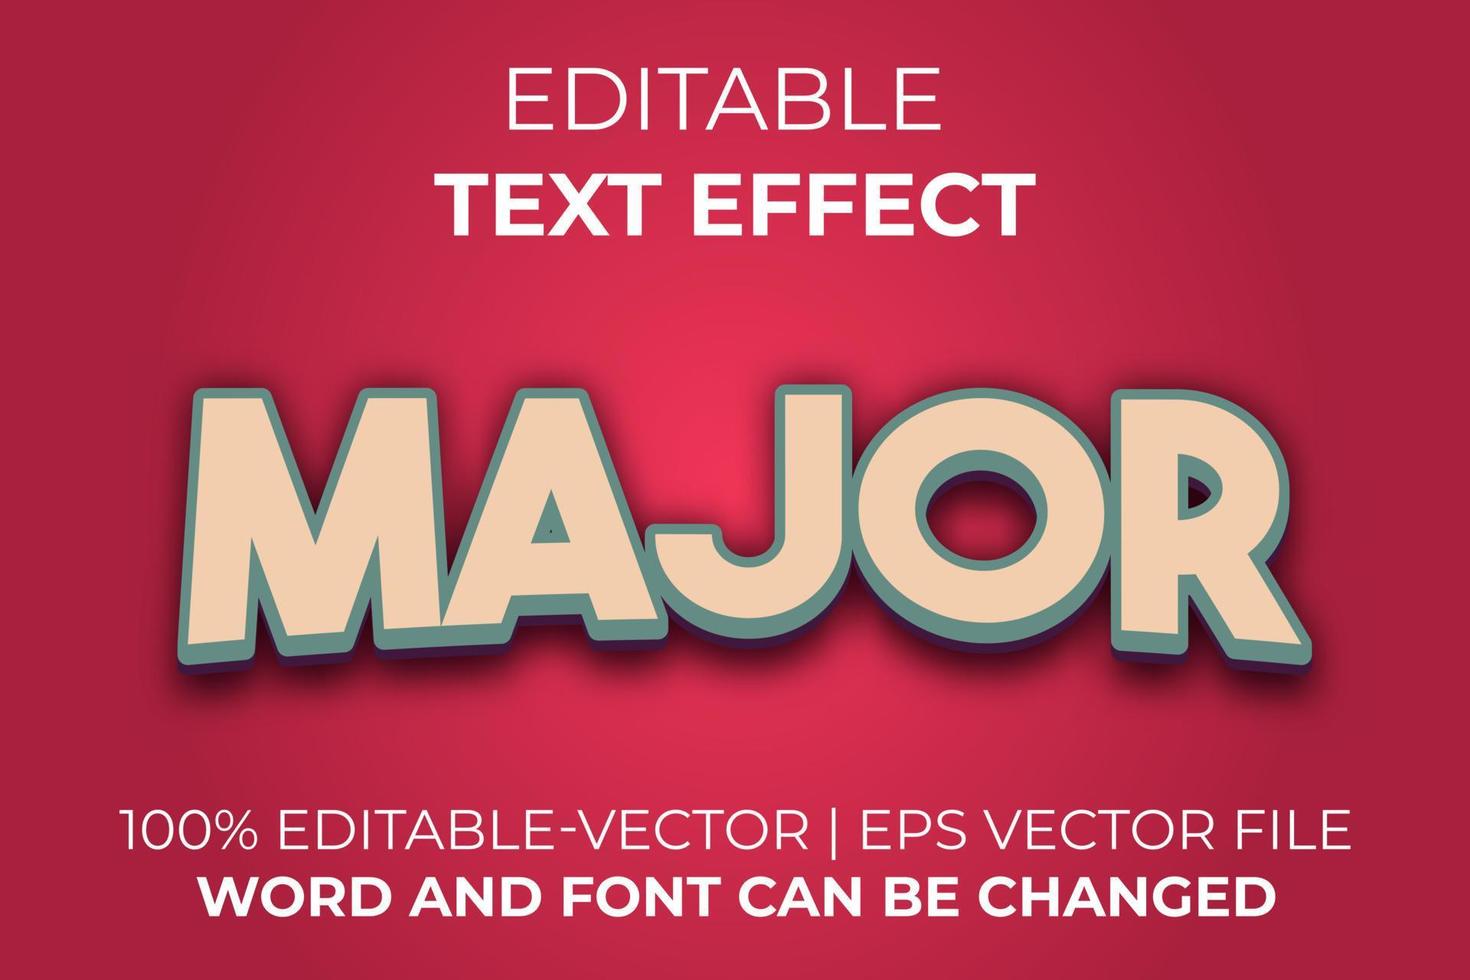 Major text effect, easy to edit vector